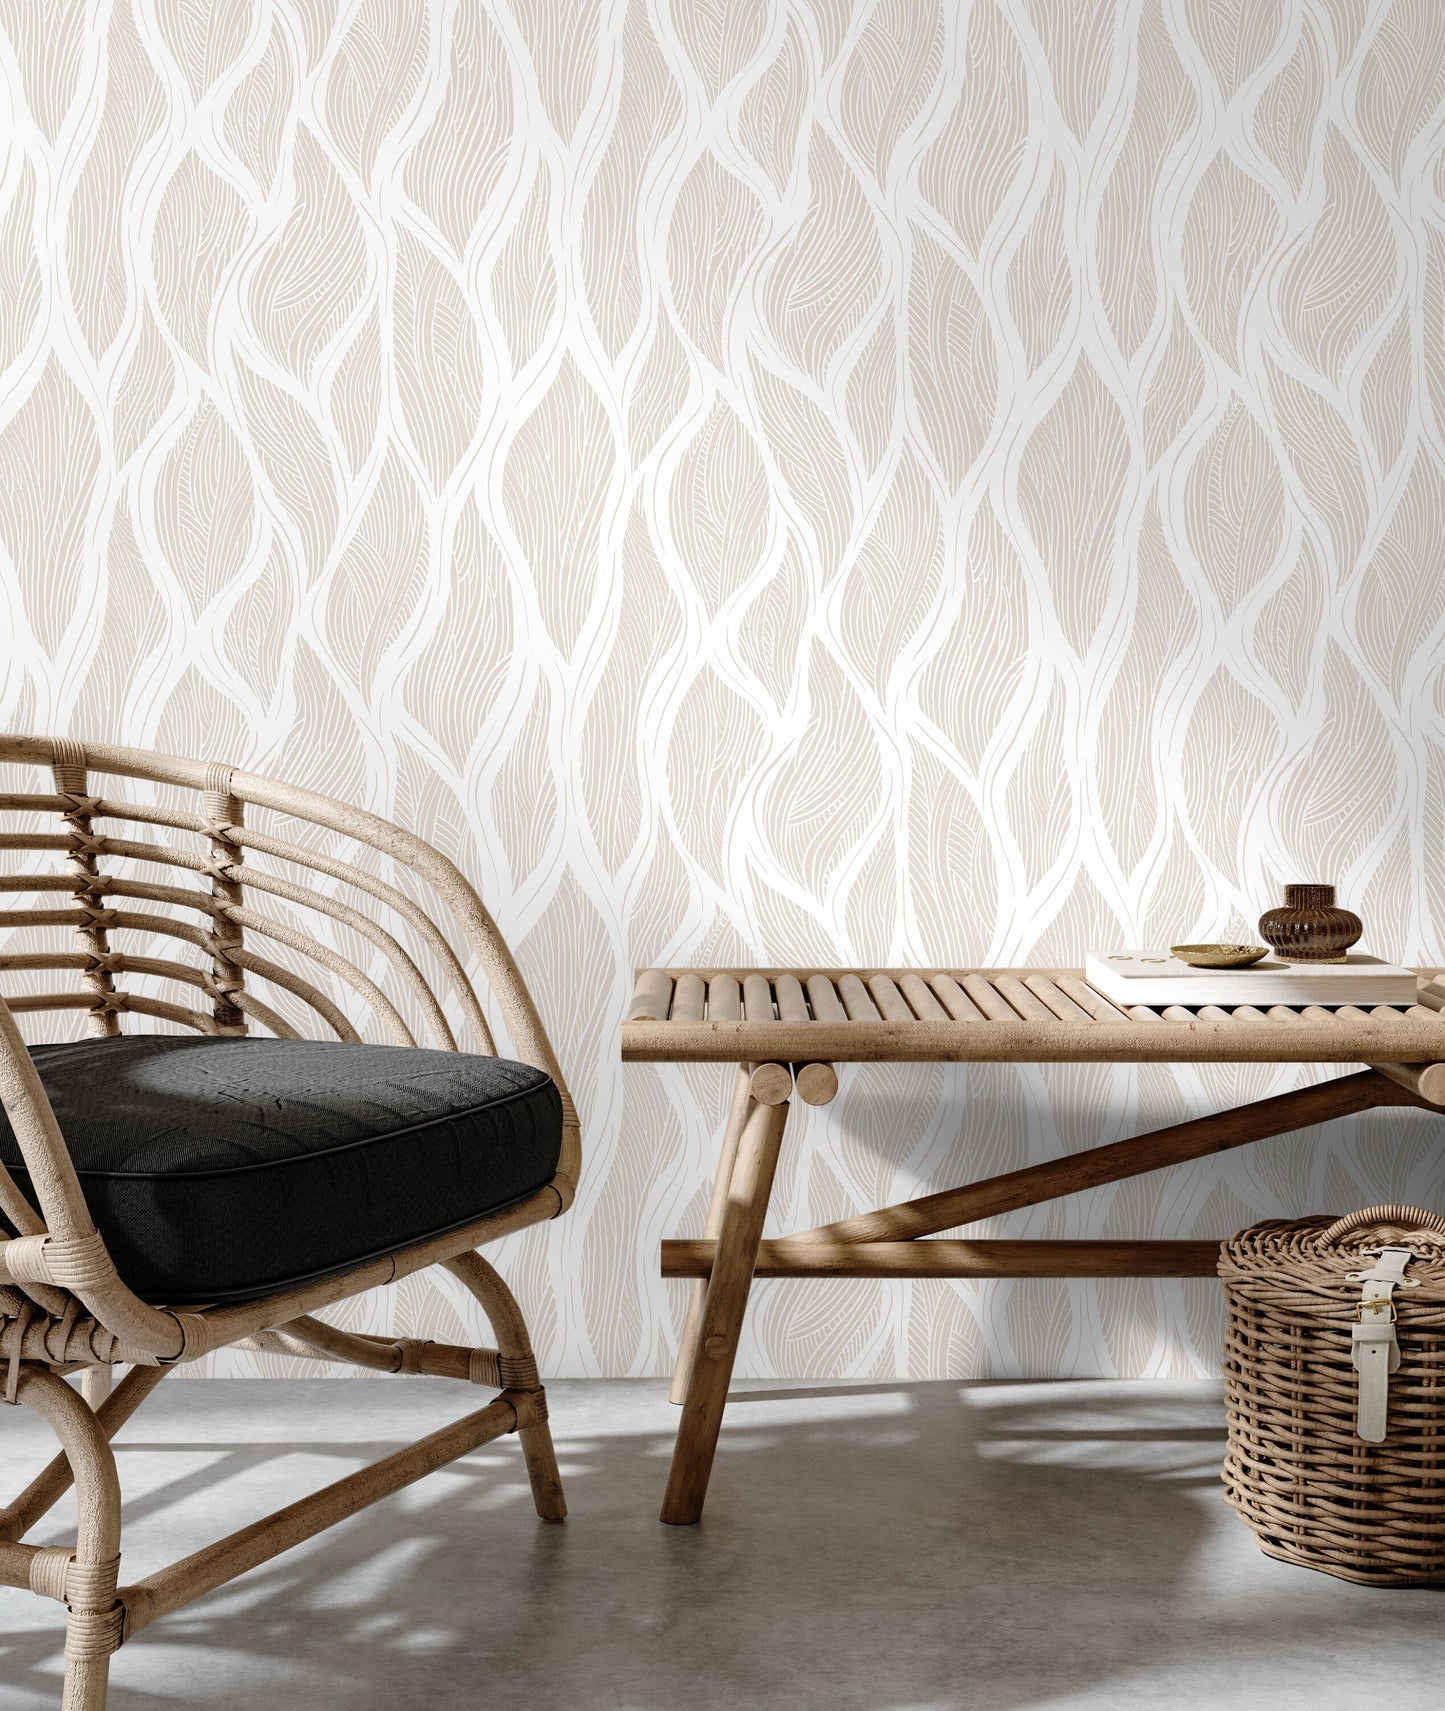 Beige Abstract Leaf Wallpaper / Peel and Stick Wallpaper Removable Wallpaper Home Decor Wall Art Wall Decor Room Decor - C627